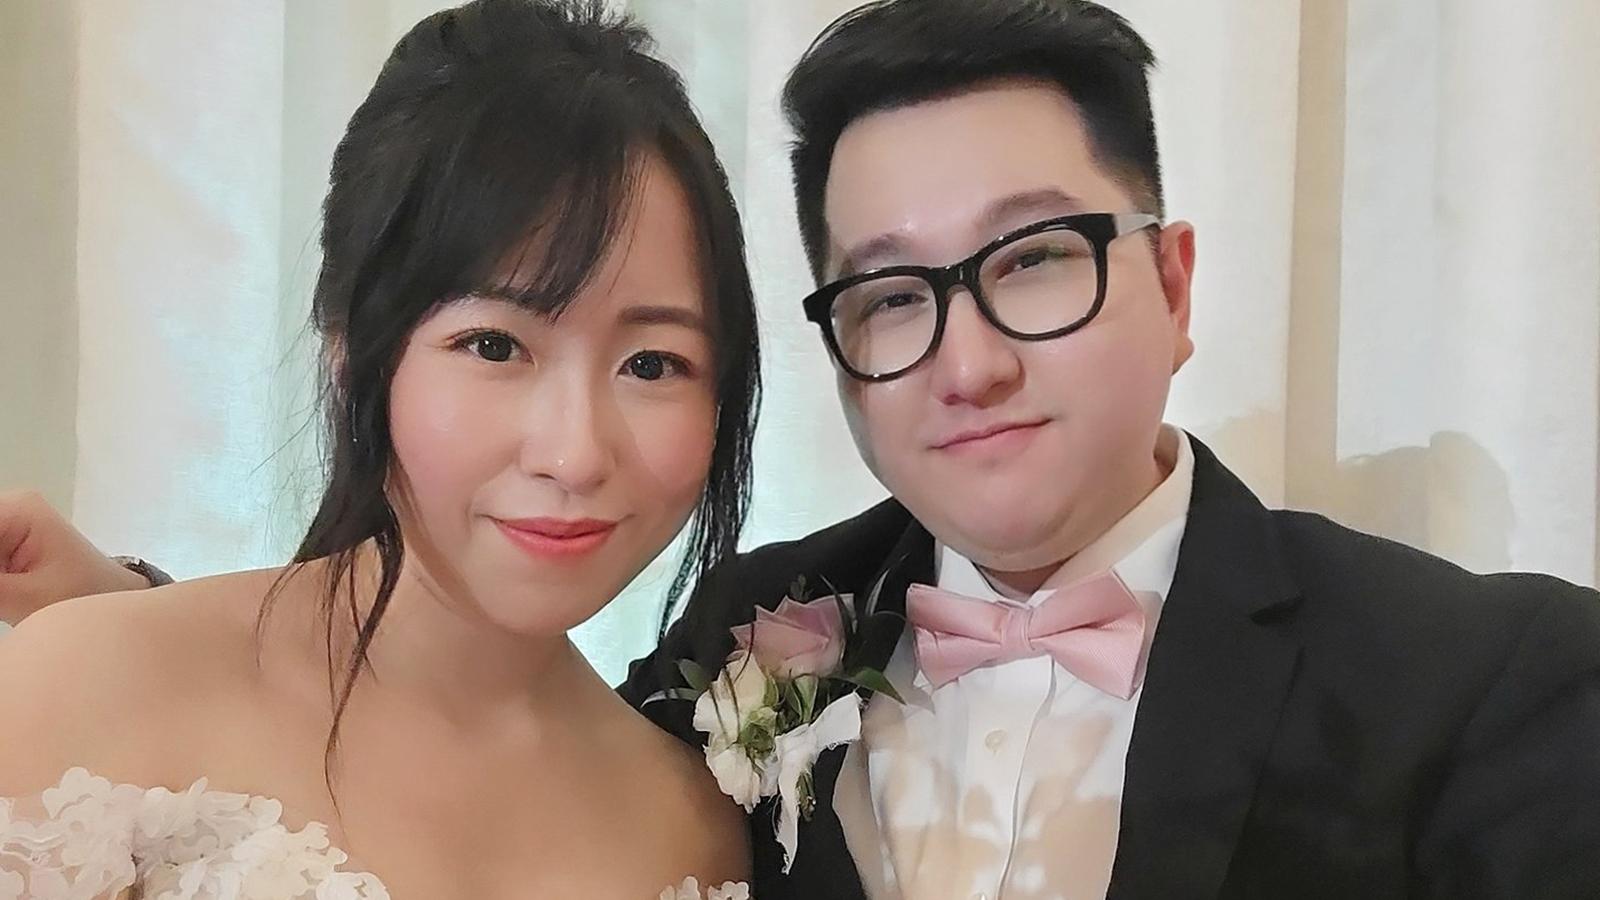 twitch-couple-separate-viral-wedding